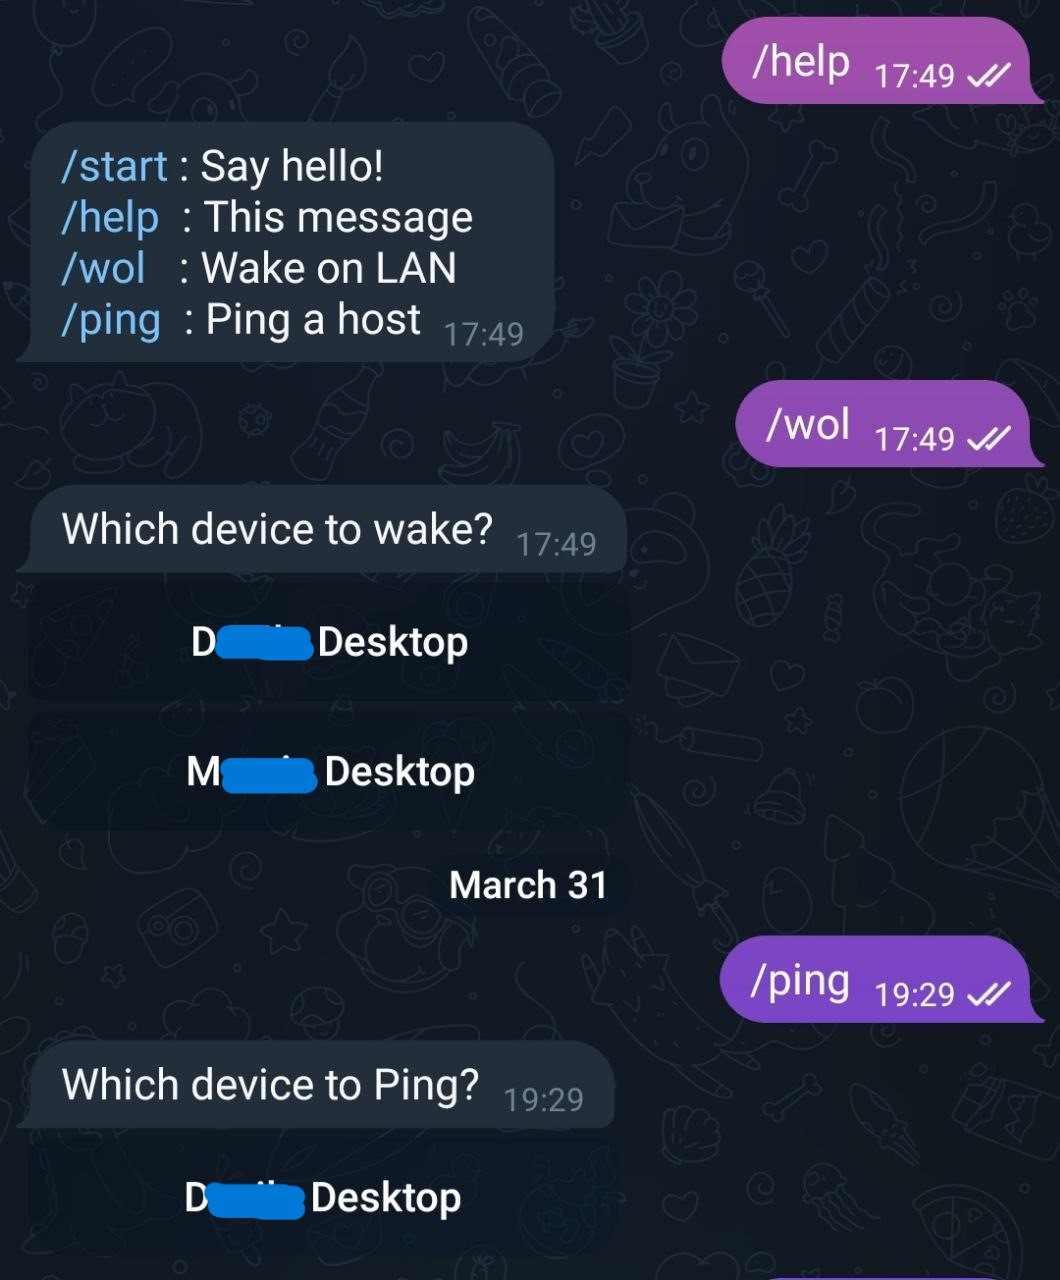 Telegram chat with the WOL bot waking up a PC